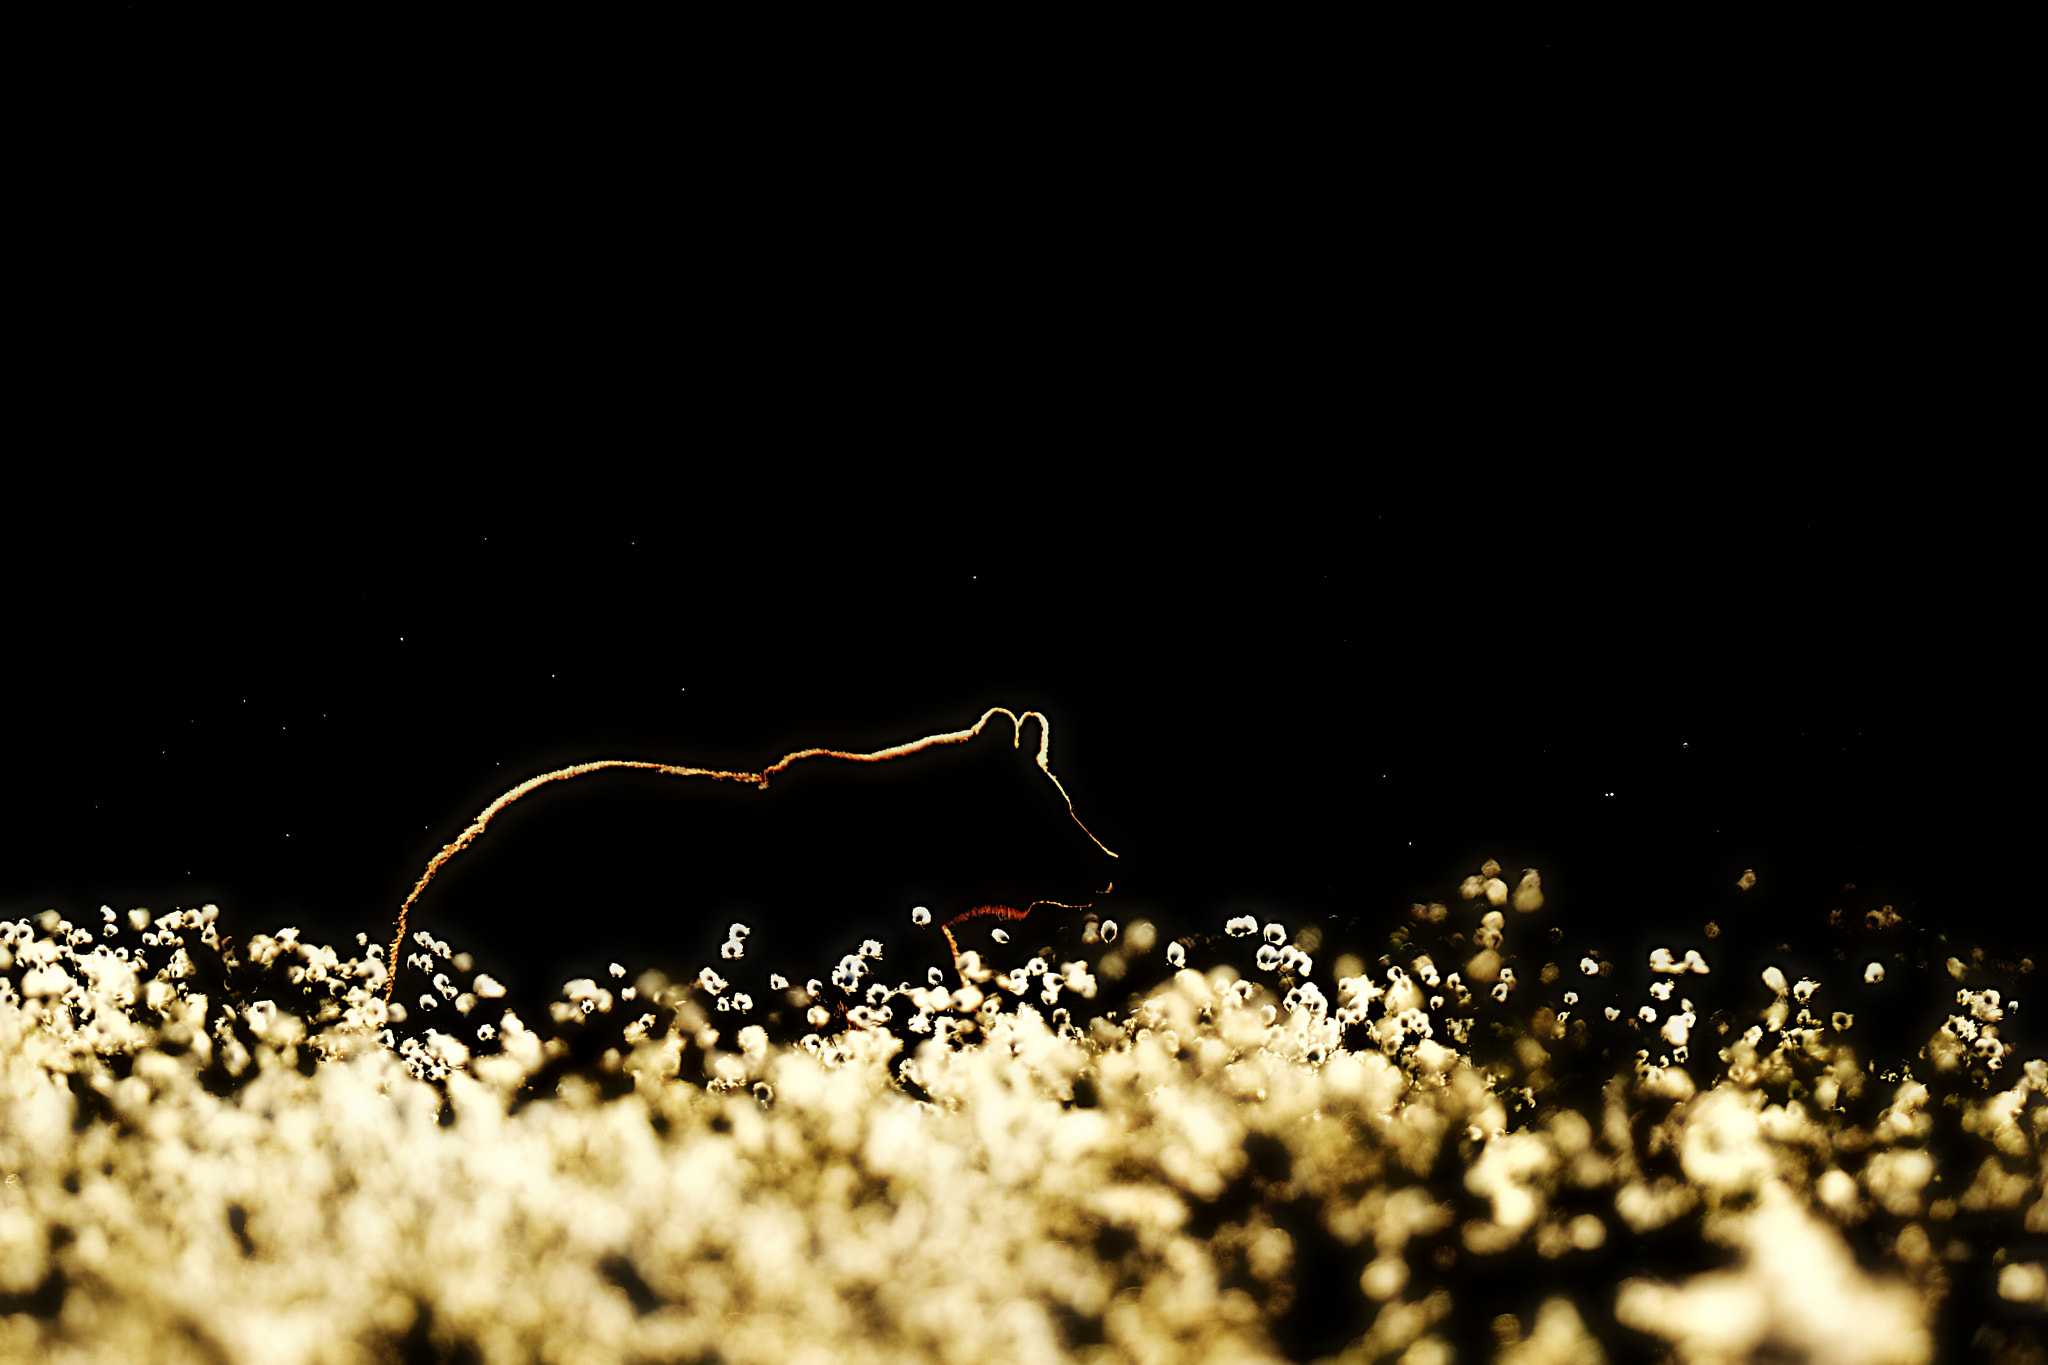 Nikon D4S sample photo. Brown bear silhouette in blossoming environment photography